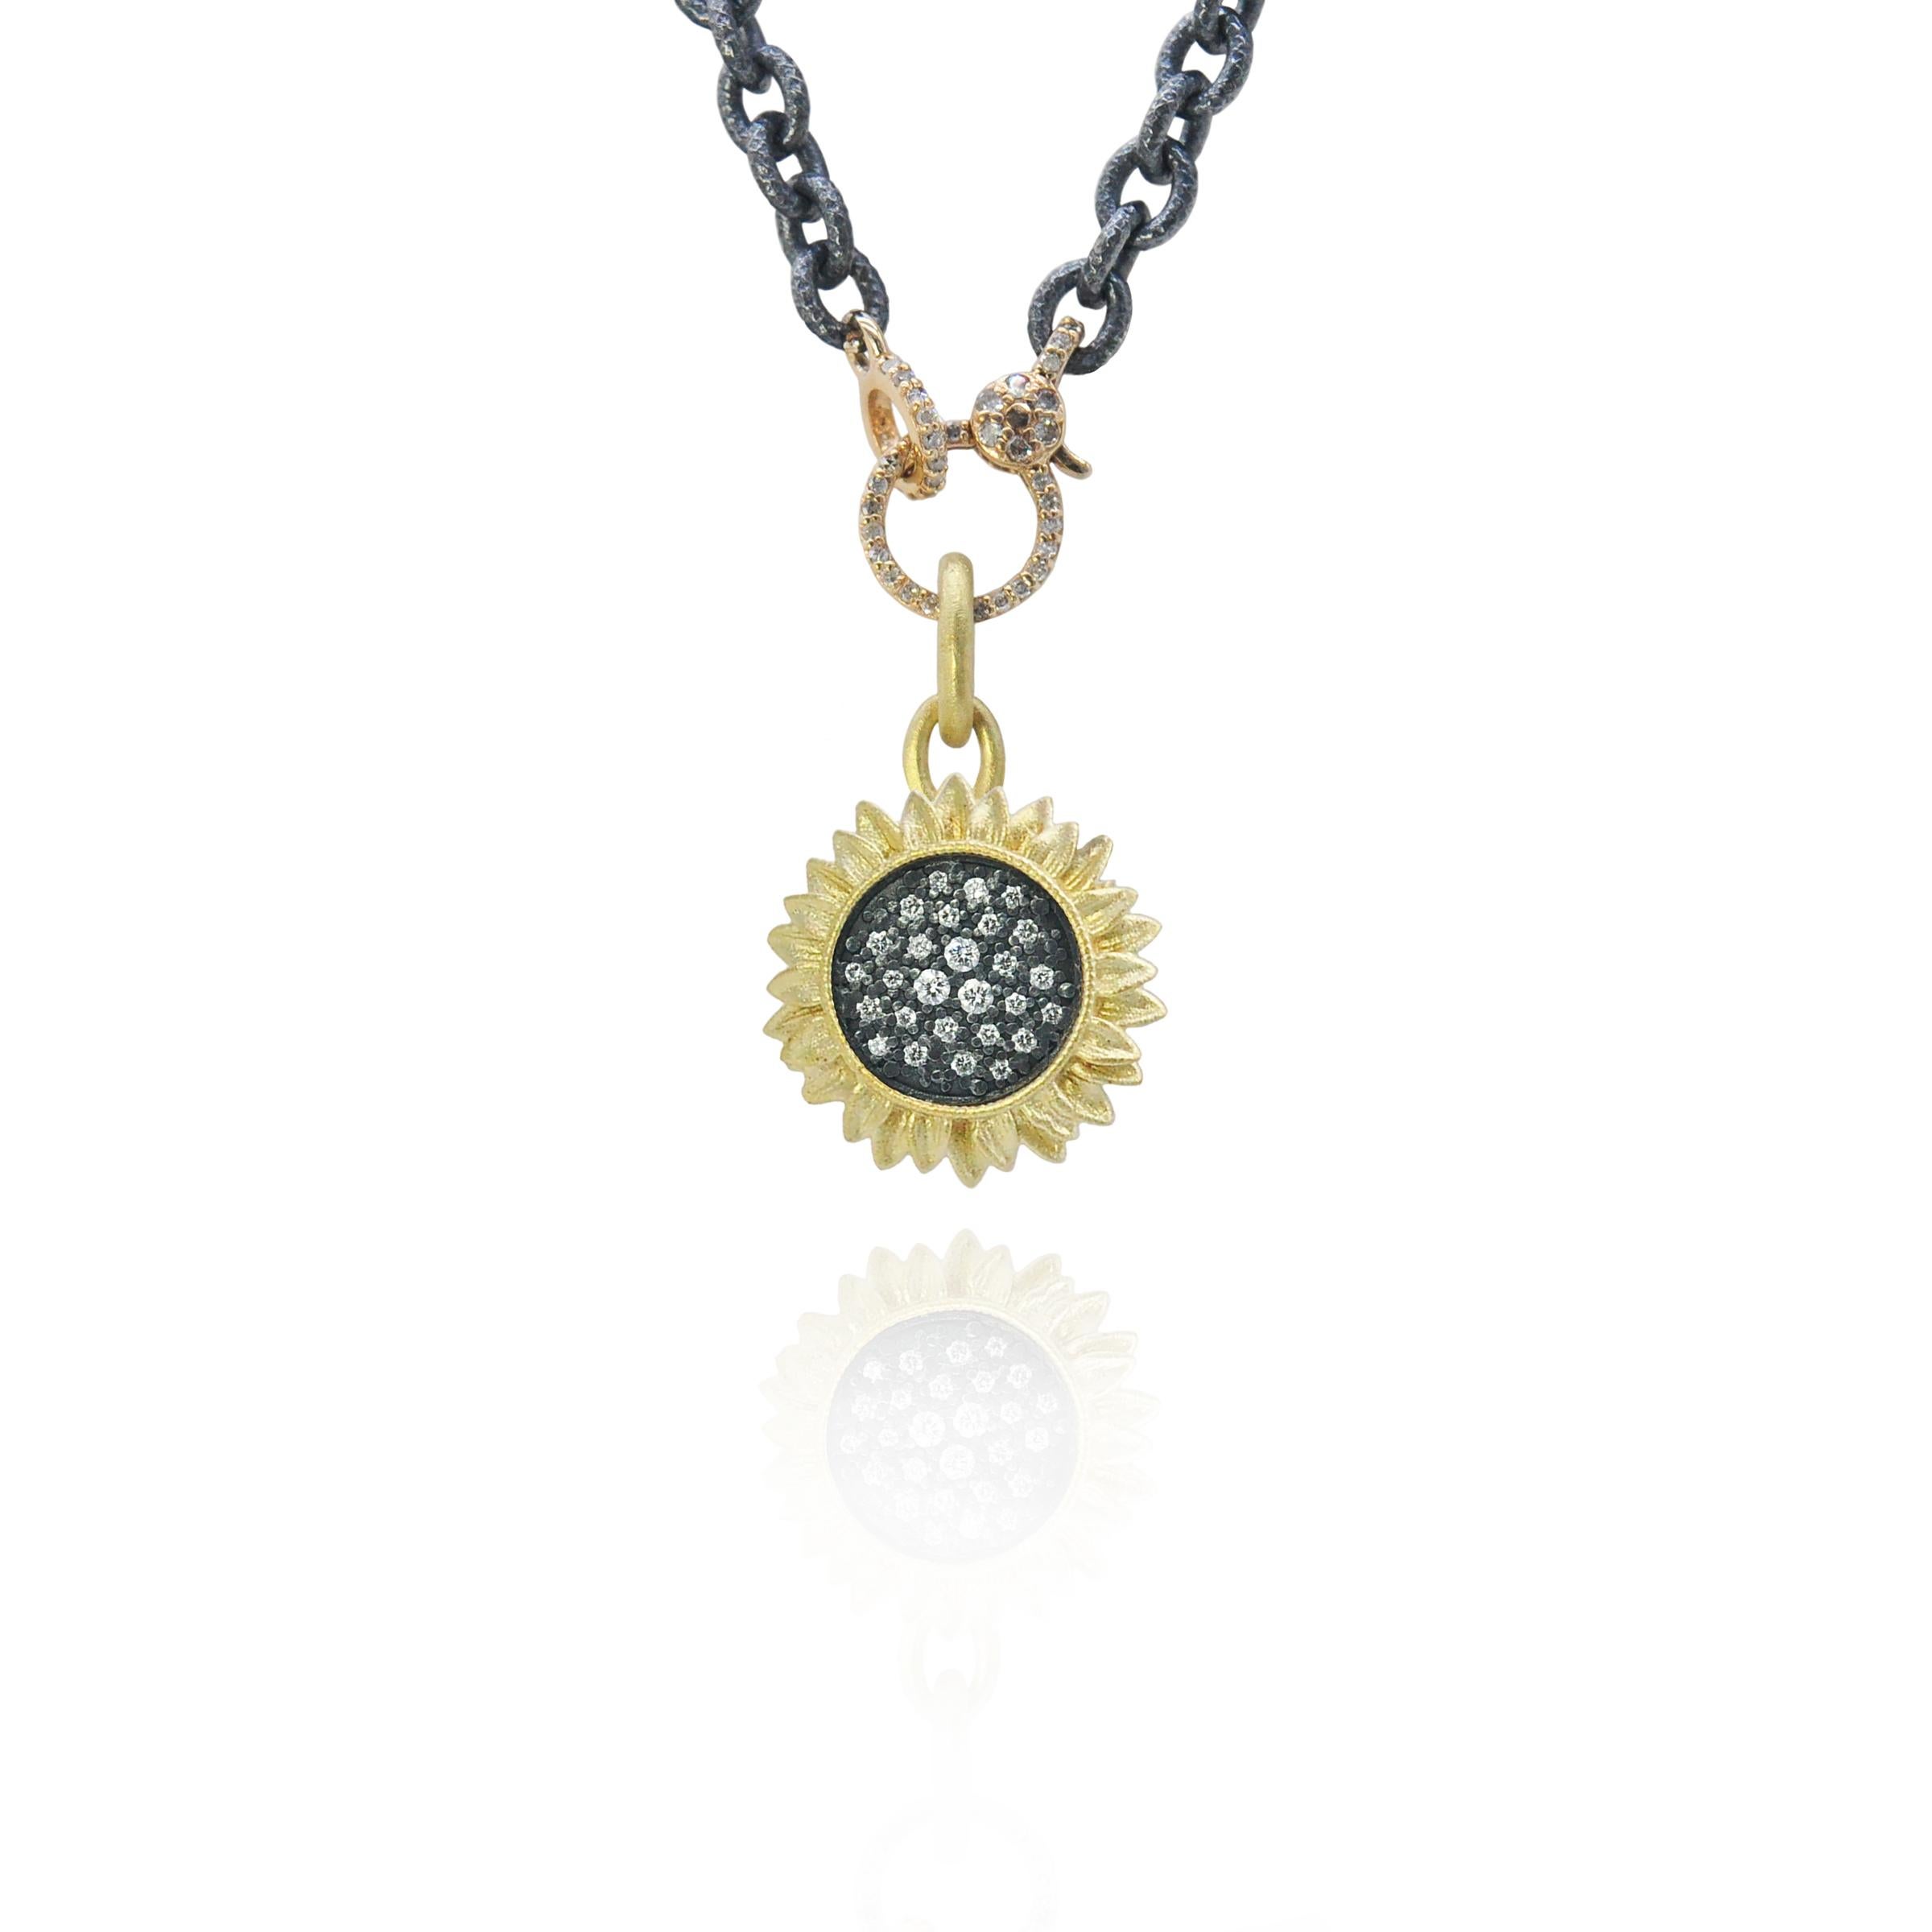 Artisan Sunflower Necklace with Pave Set Diamonds in Oxidized Silver with Toggle, Medium For Sale